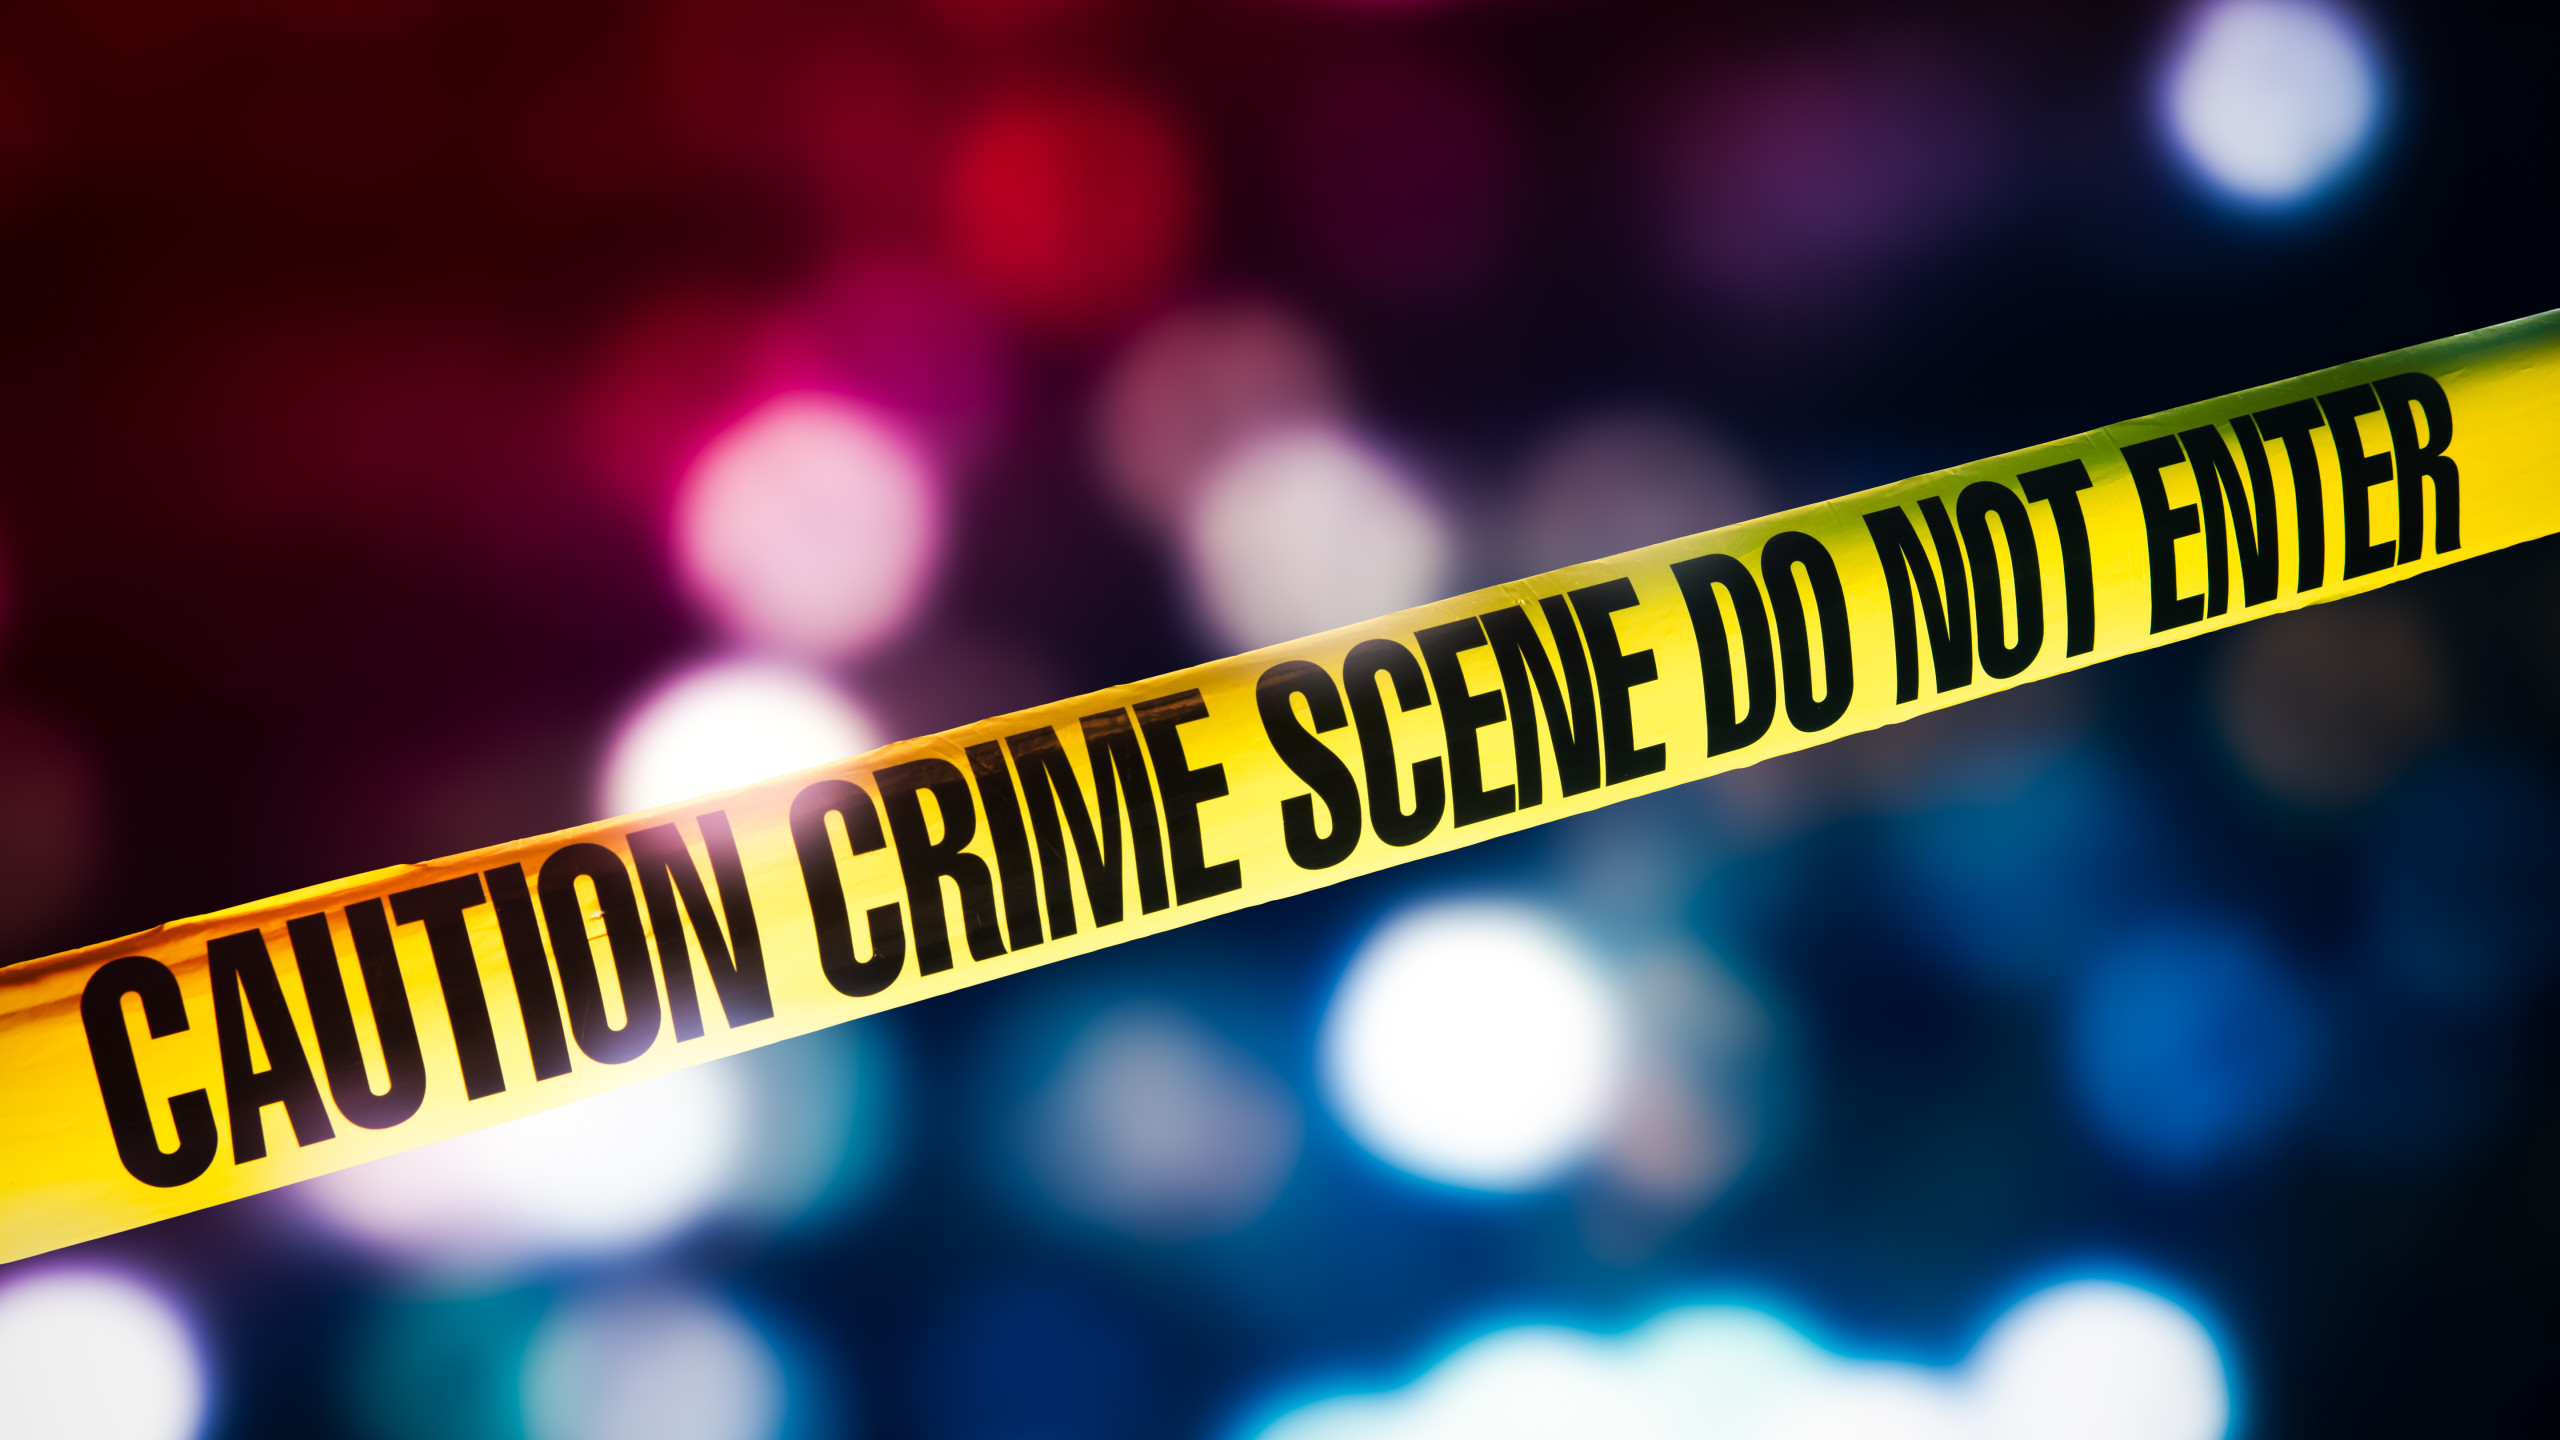 Officers investigate bullet riddled body found in Piarco